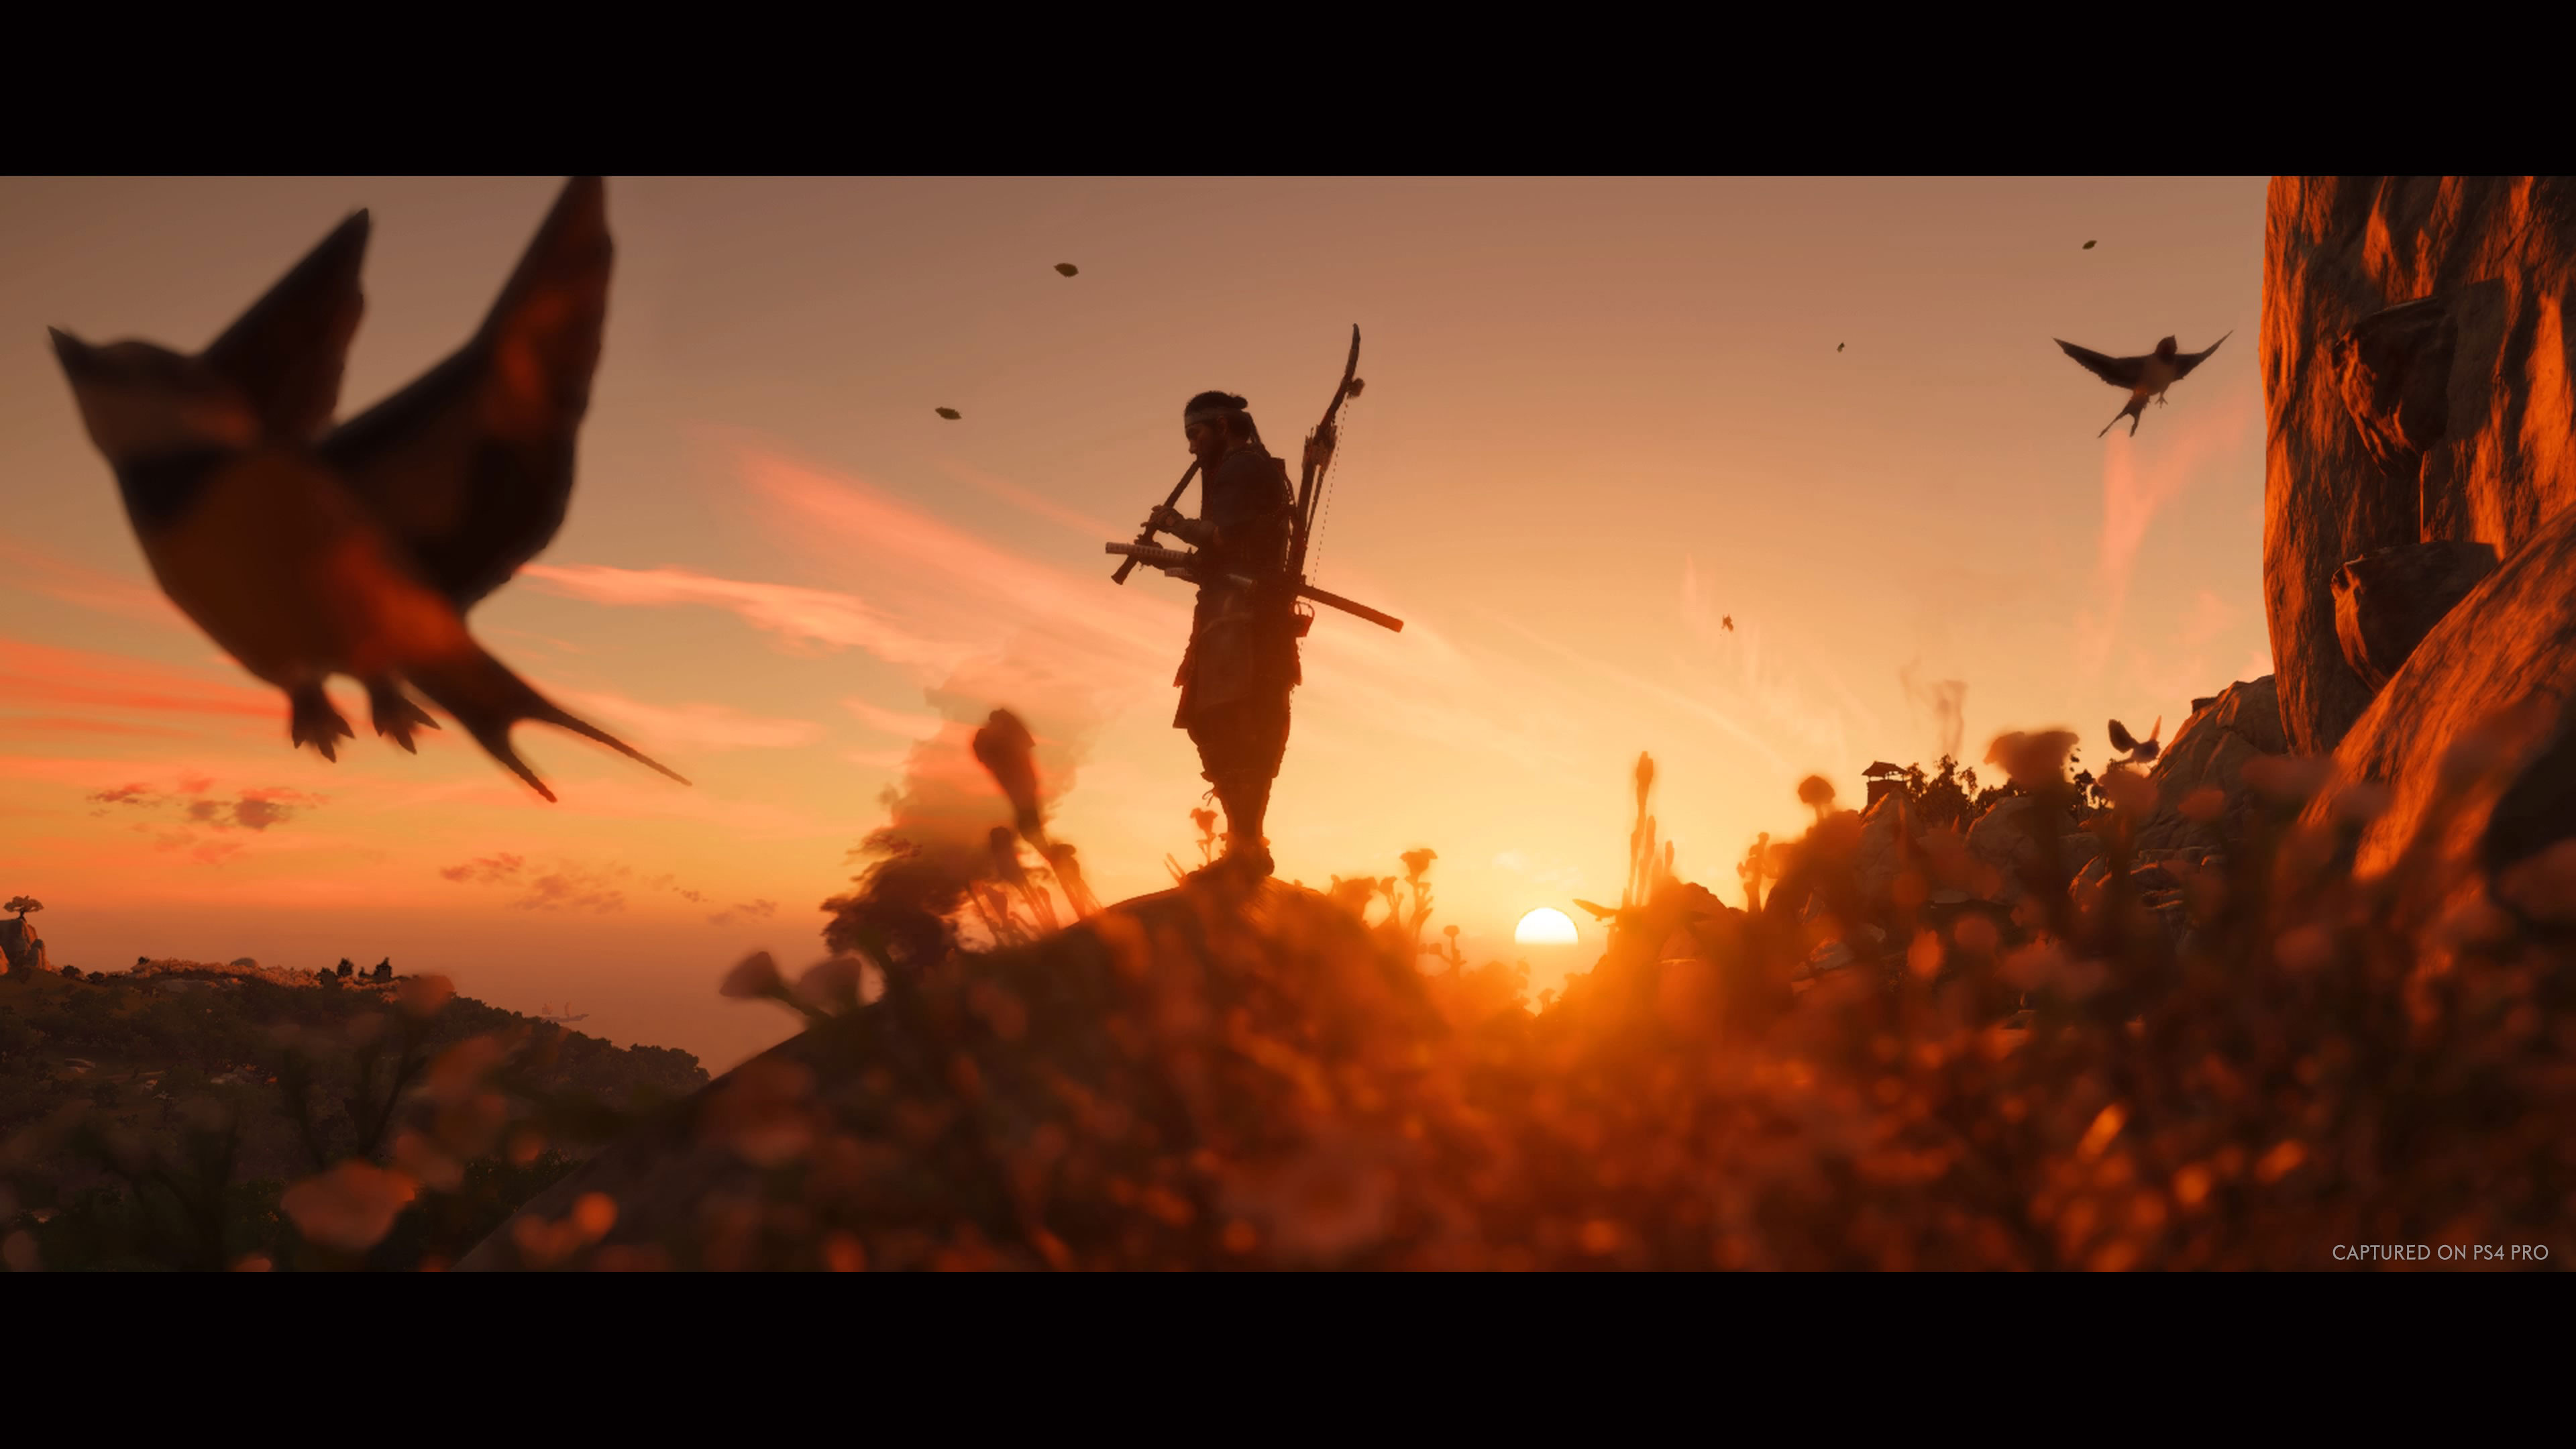 ps now ghost of tsushima pc